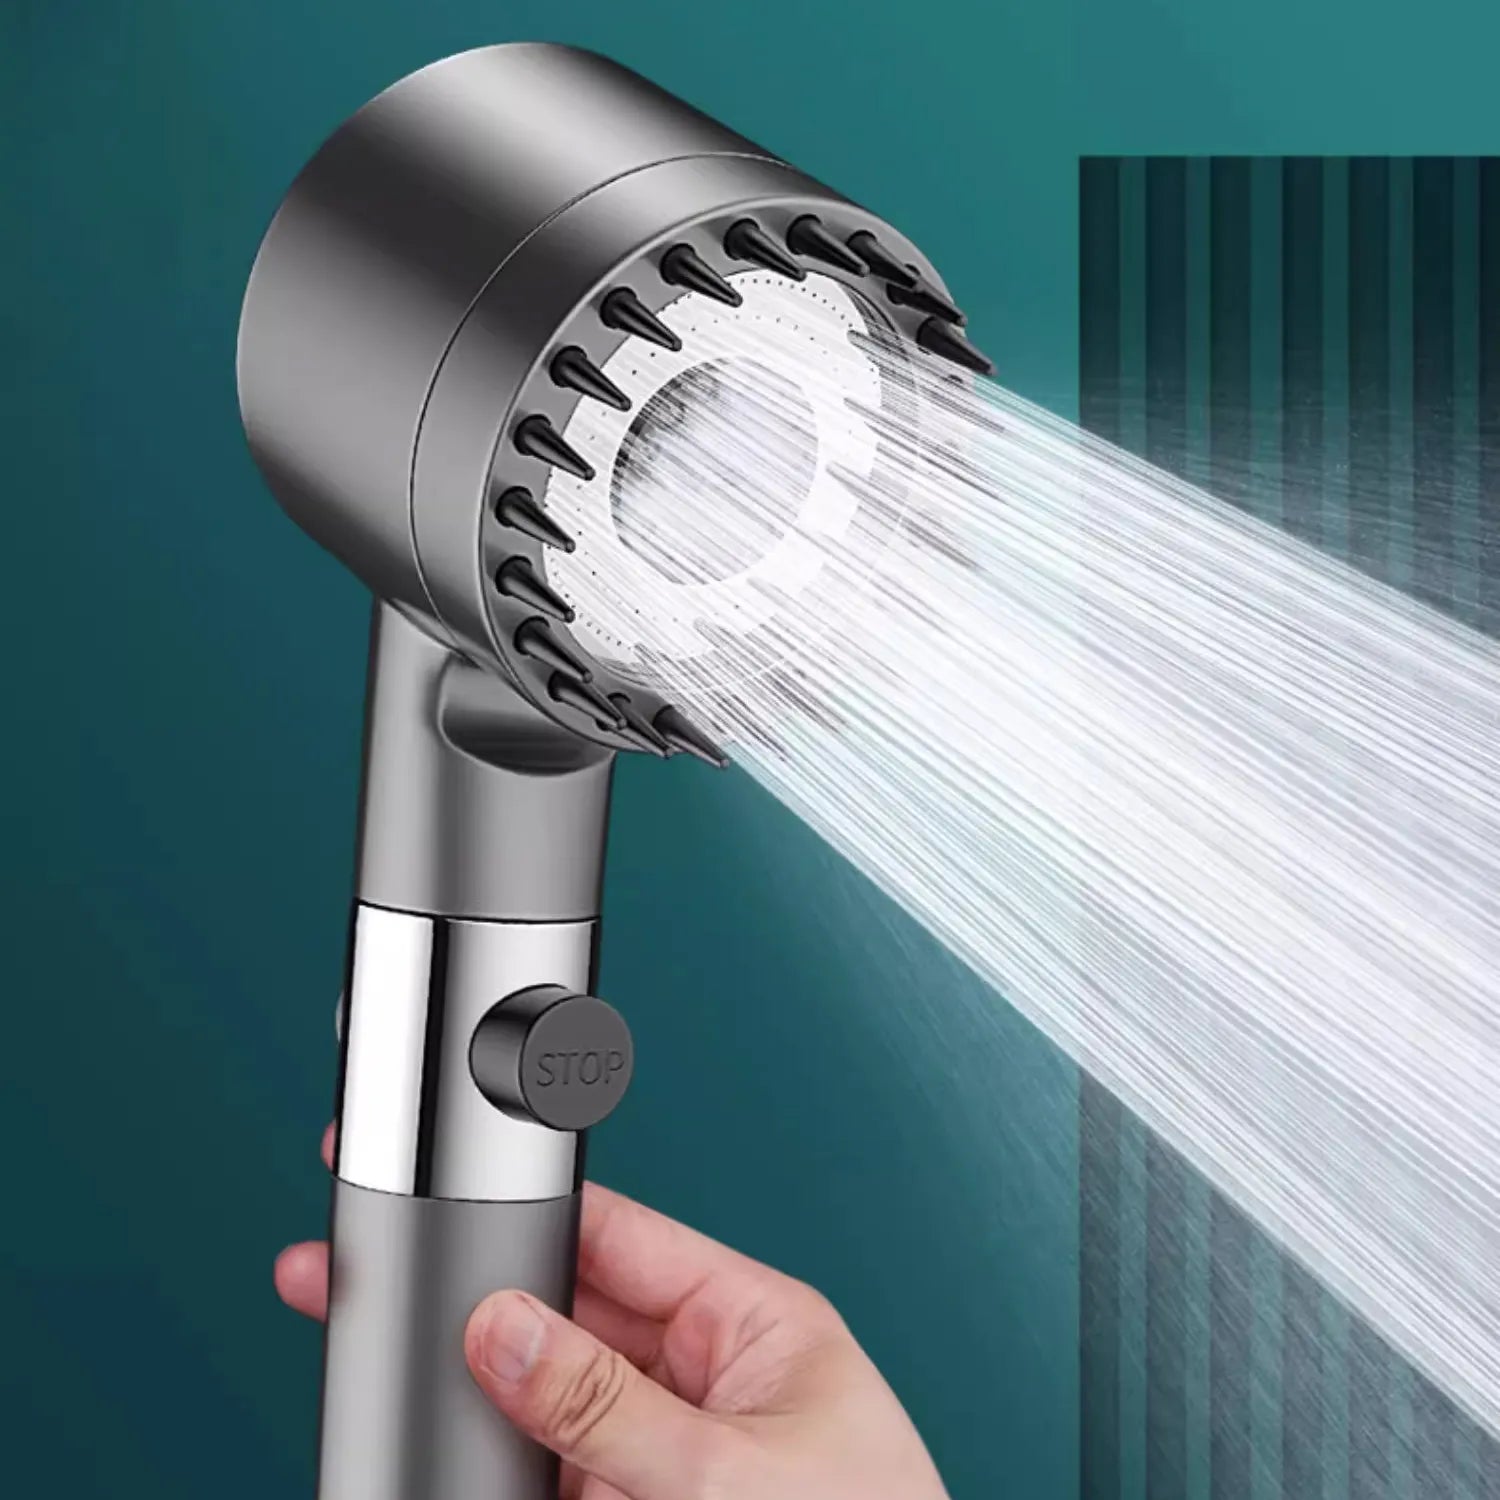 4 Modes Ultimate High Pressure Shower Head with Filter: Relaxing Massage  ourlum.com   